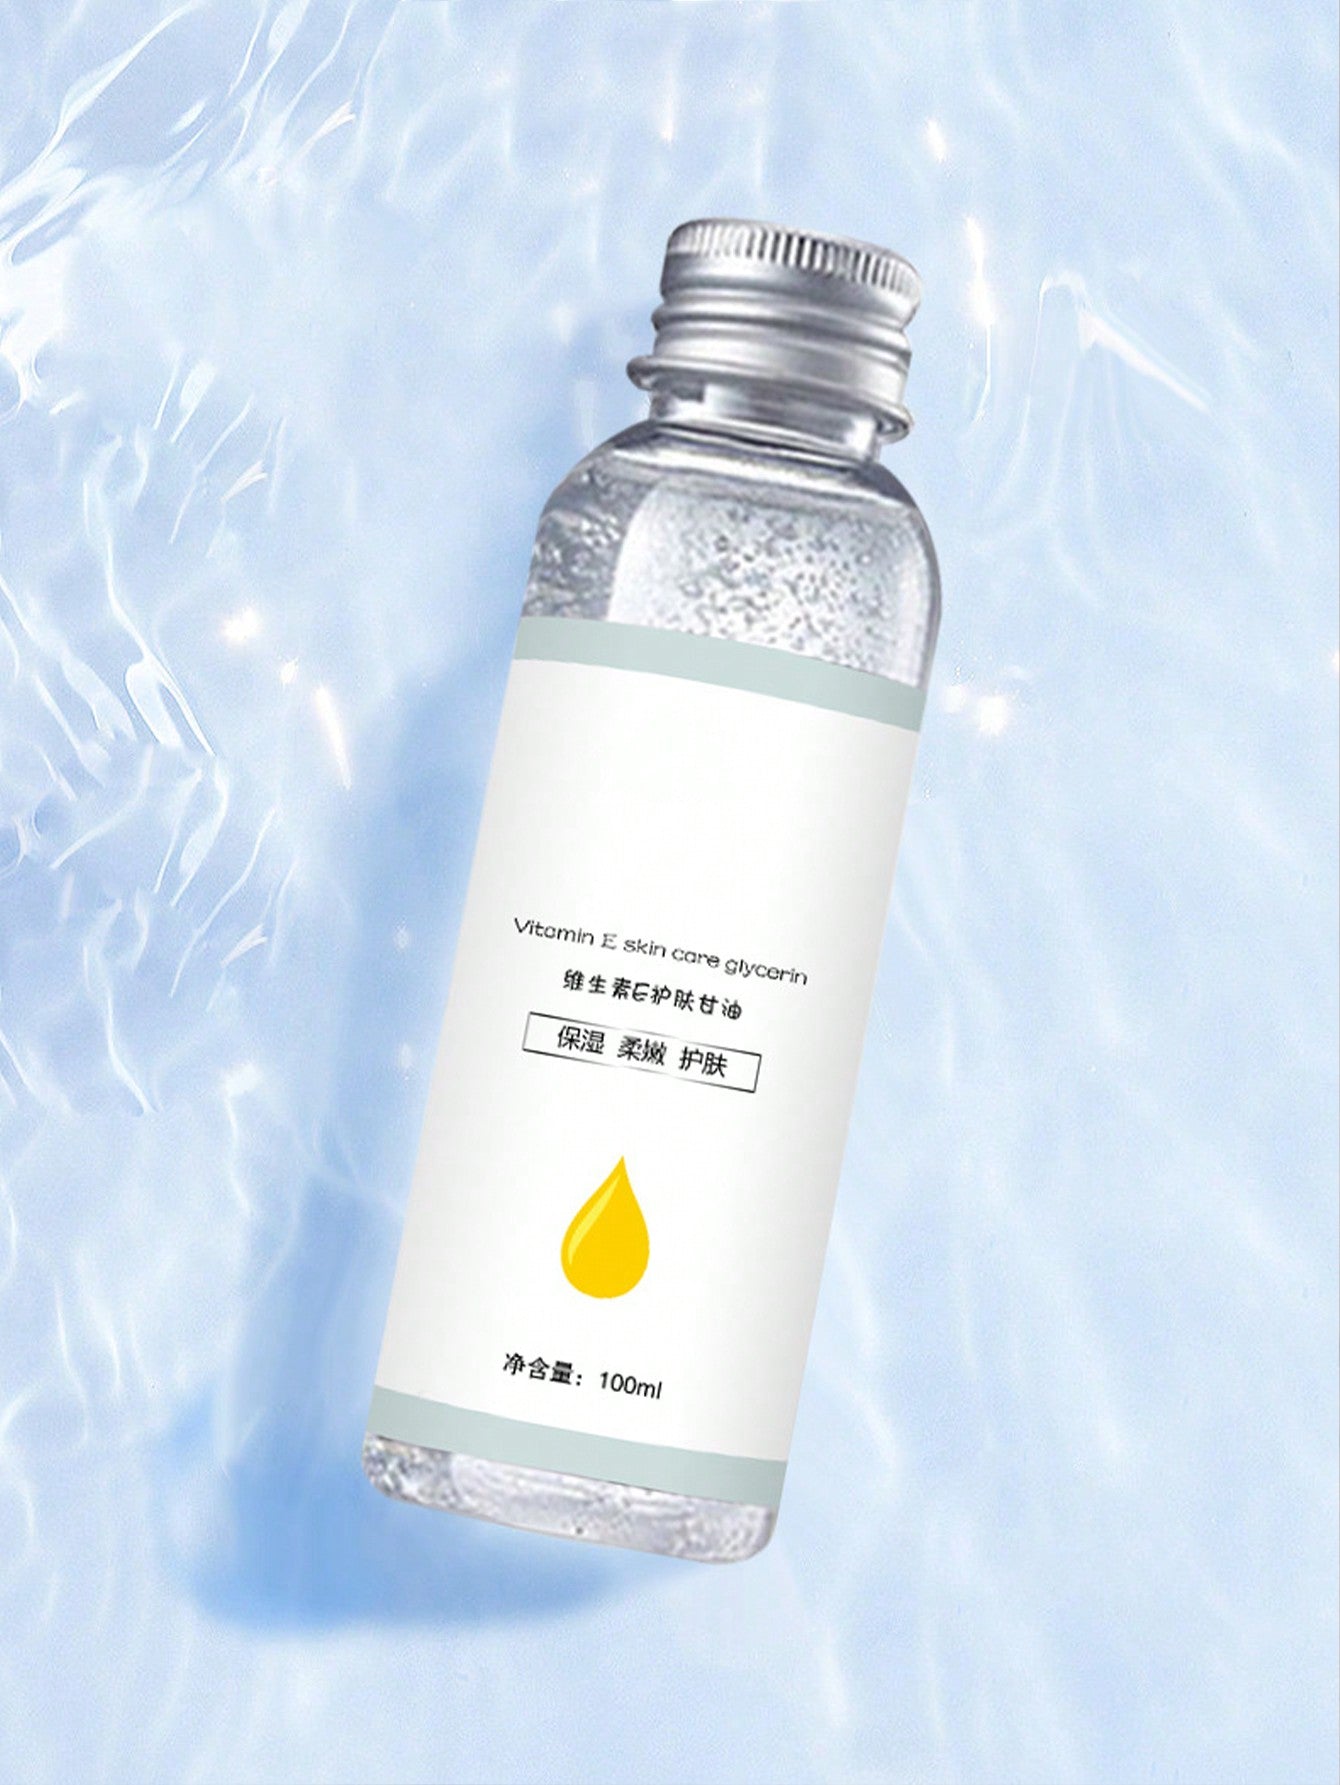 1 Bottle 100ml Vitamin E Skin Care Glycerin, Moisturizes Skin Without Being Greasy, Refreshing And Hydrating For Full Body